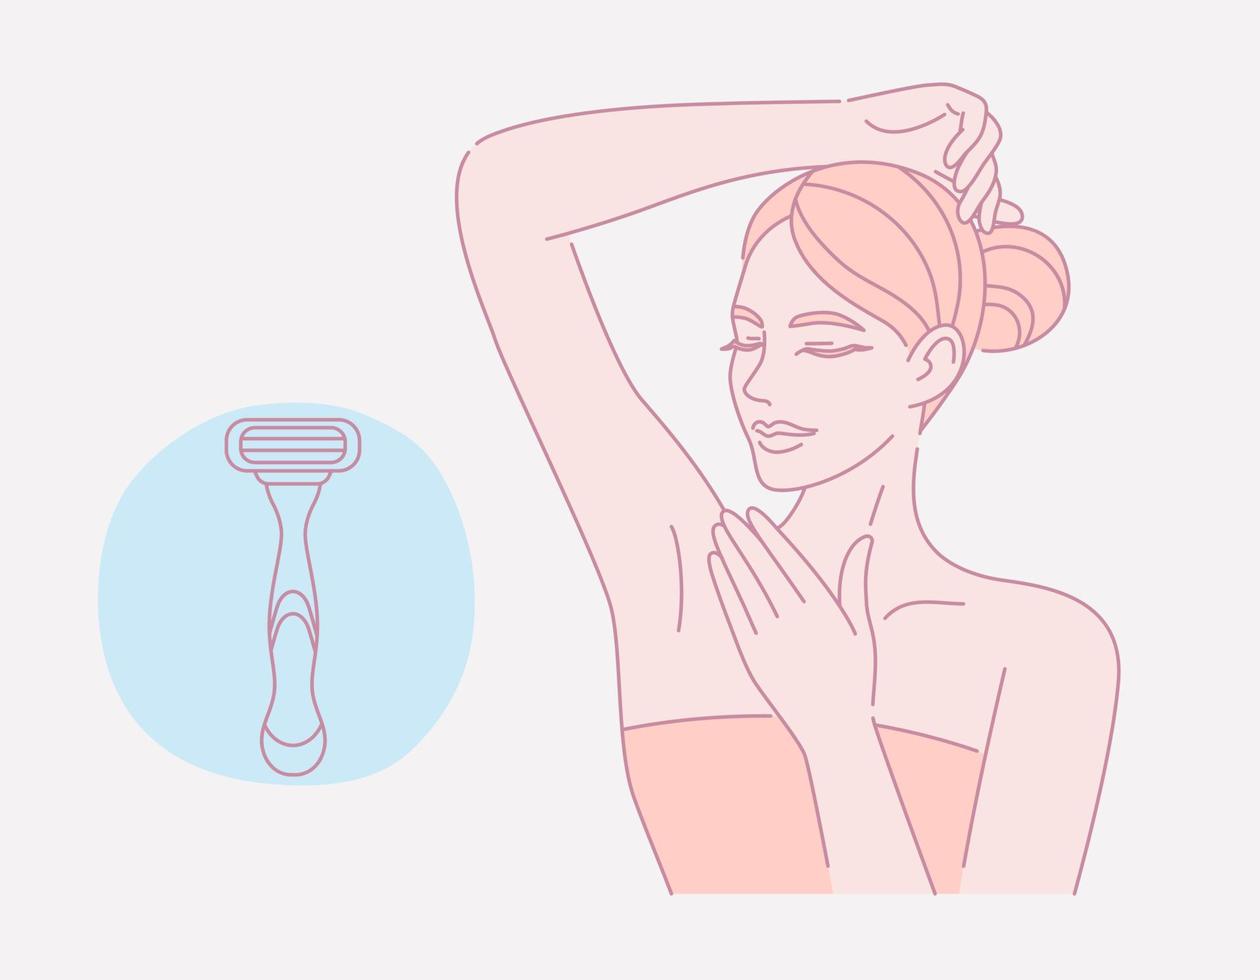 Female smooth armpit. Hair removal. Laser and wax epilation. Linear logo minimalist style. Beauty body care concept. Vector design illustration.